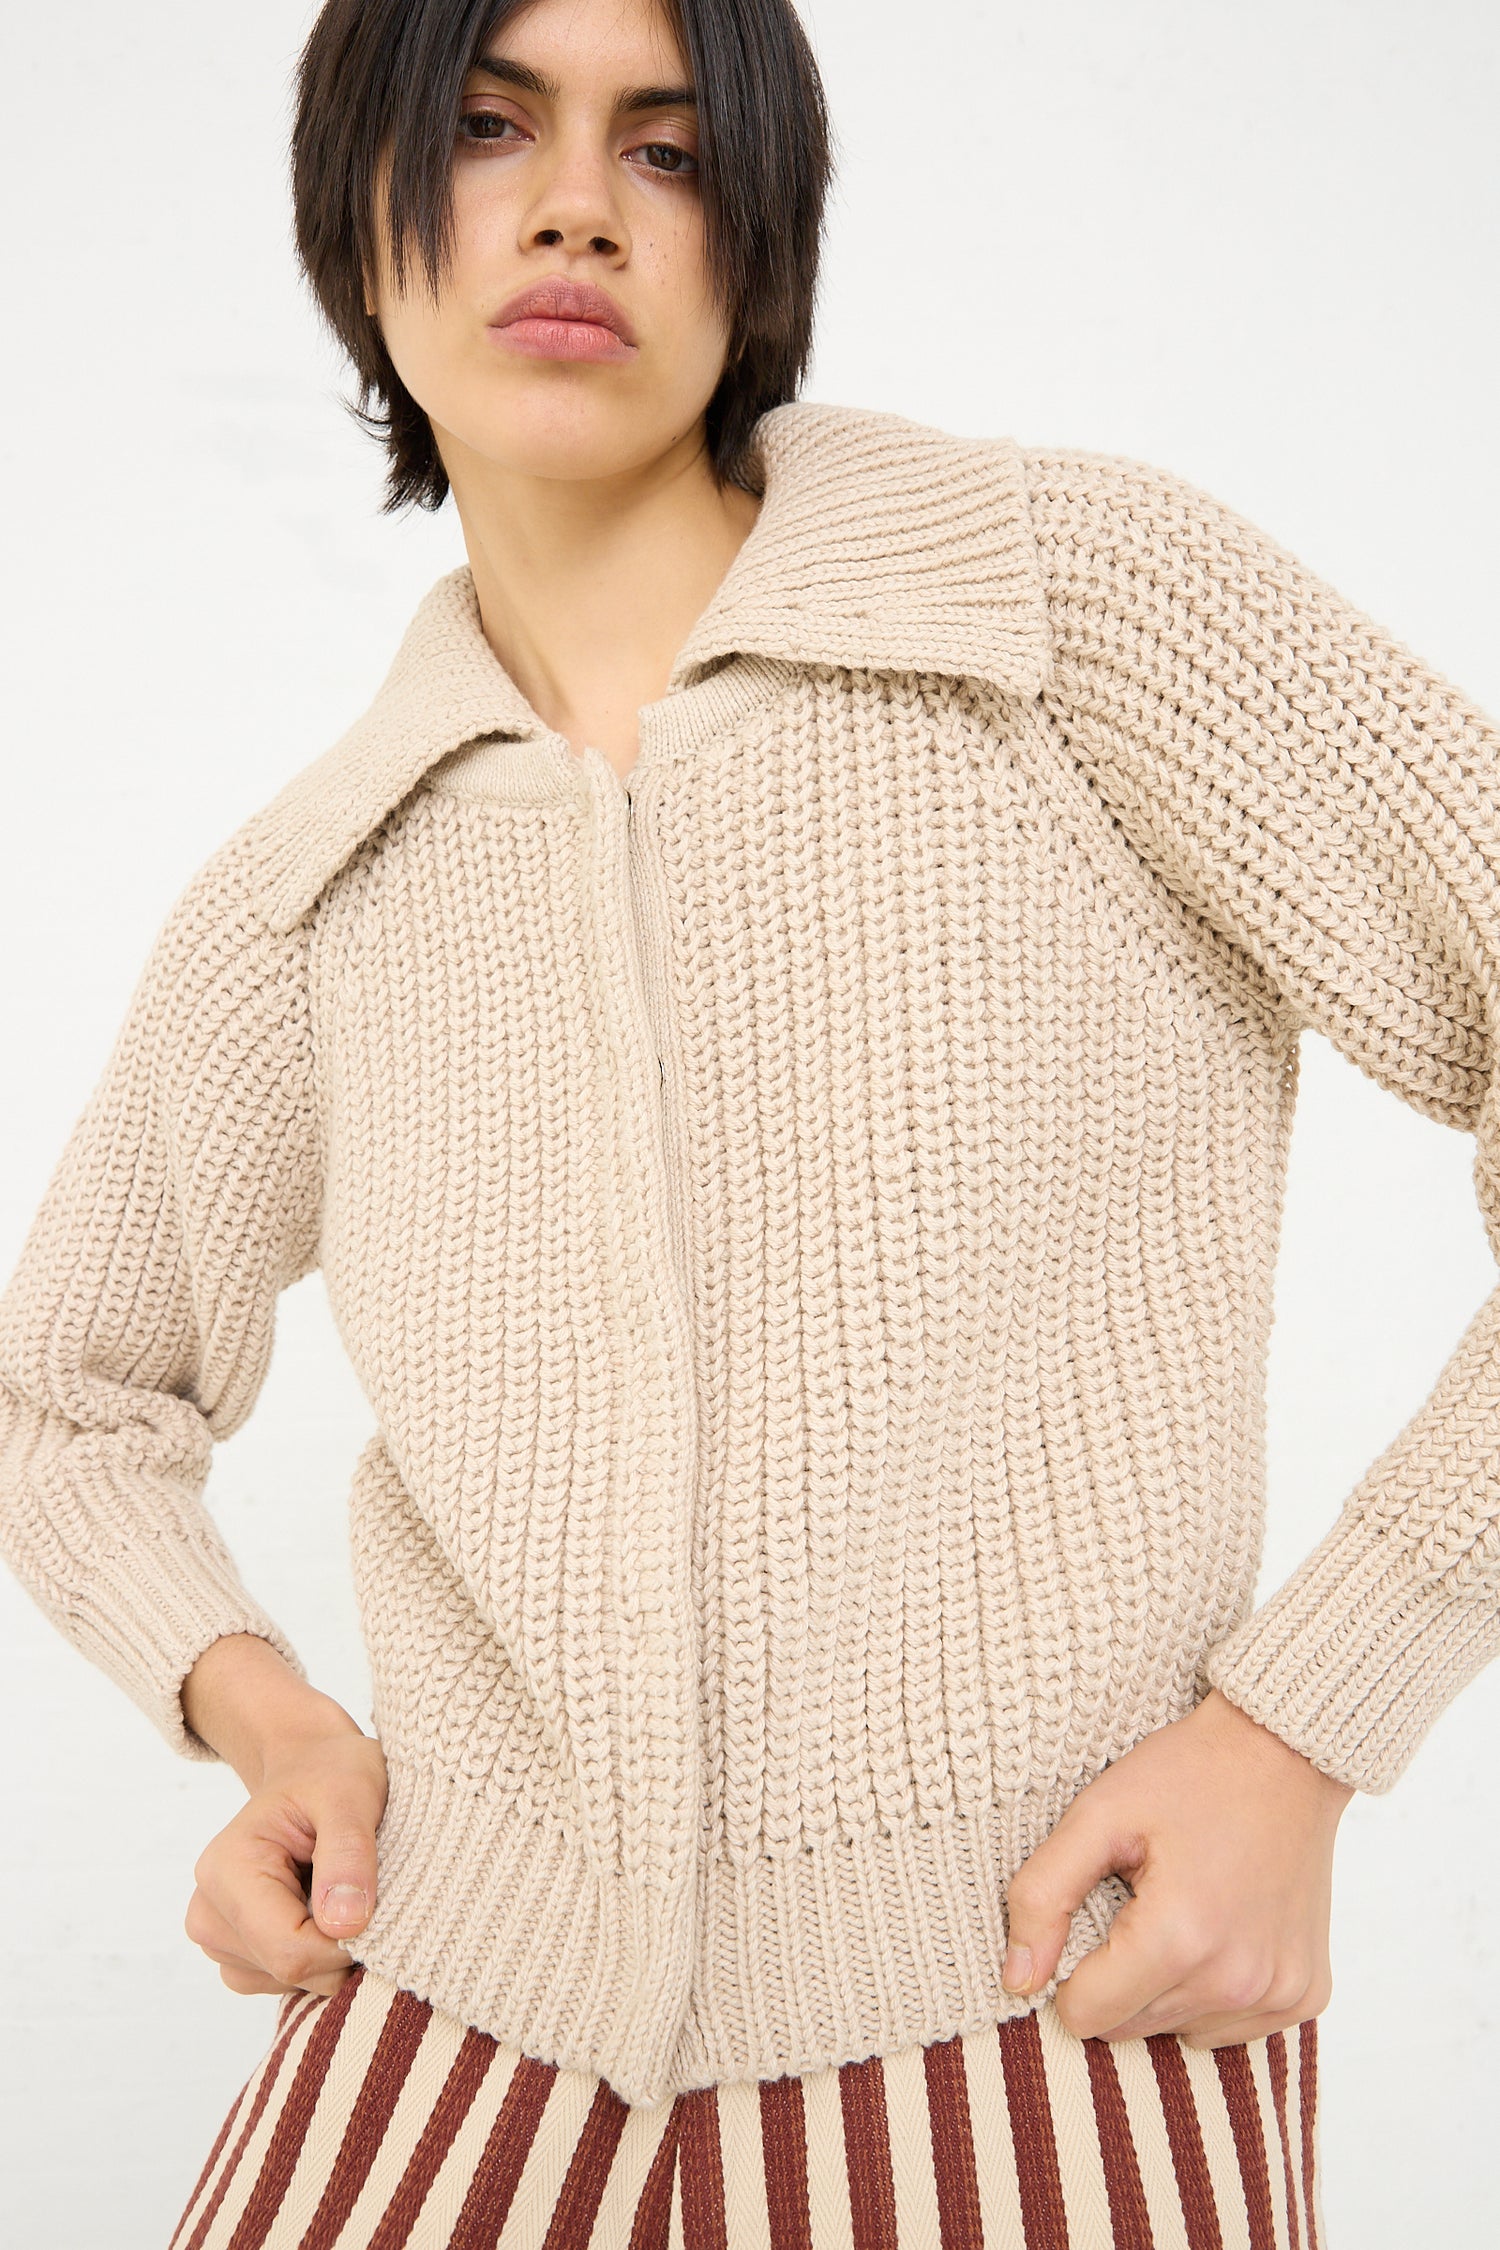 A person posing in a Cotton and Alpaca Freda Cardigan in Ecru by Caron Callahan with hands on hips against a white background.